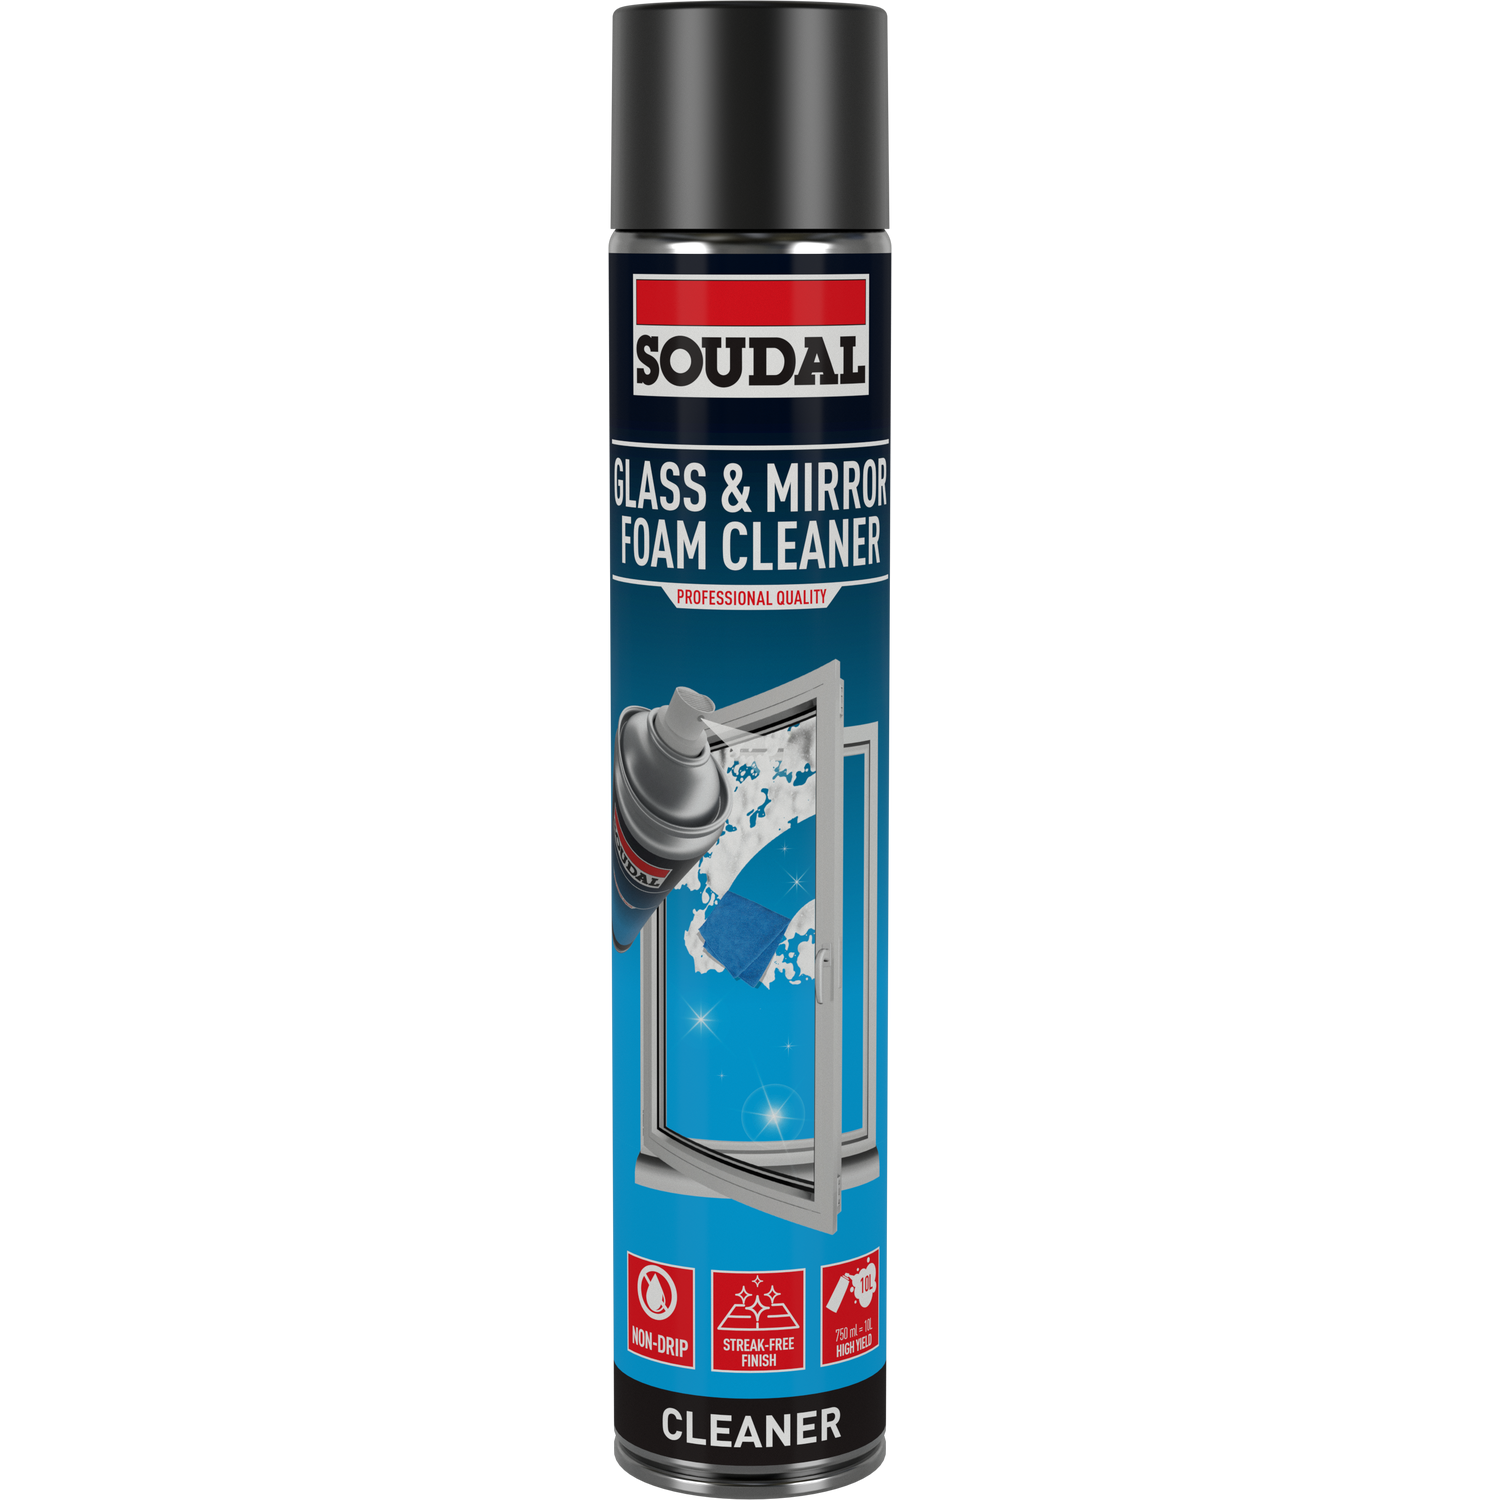 Soudal Glass and Mirror Foam Cleaner Image